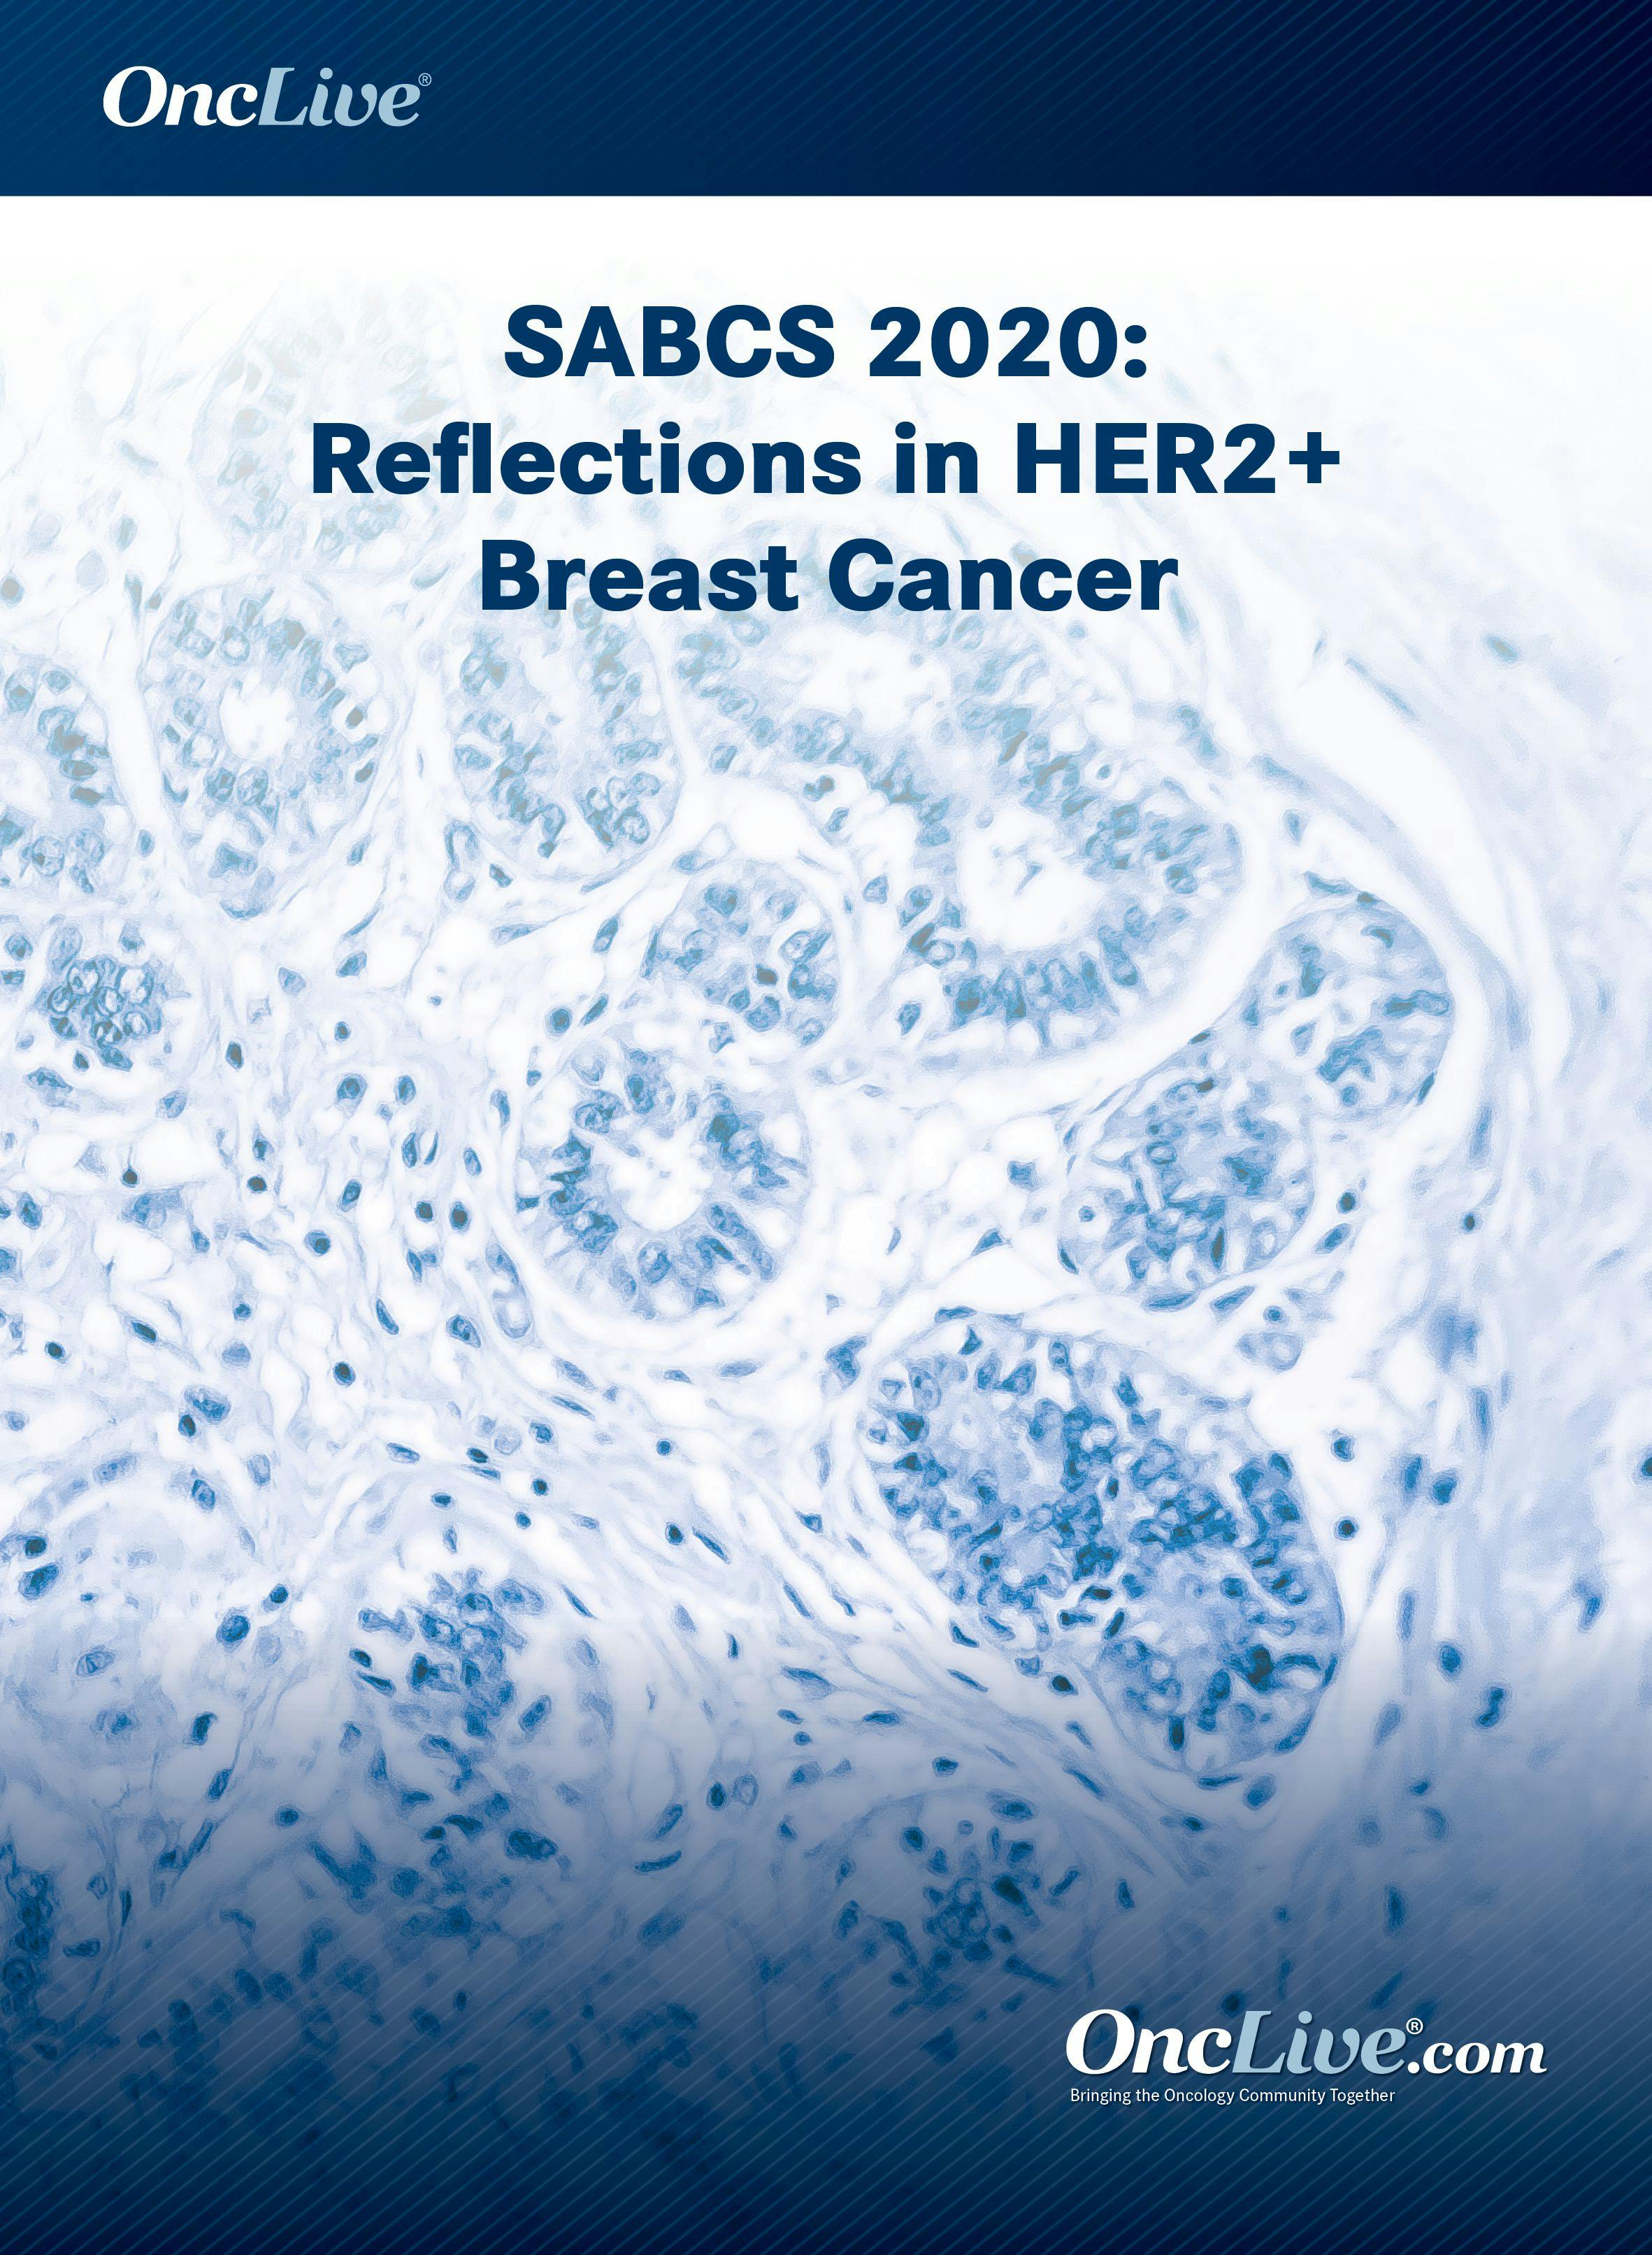 SABCS 2020: Reflections in HER2+ Breast Cancer